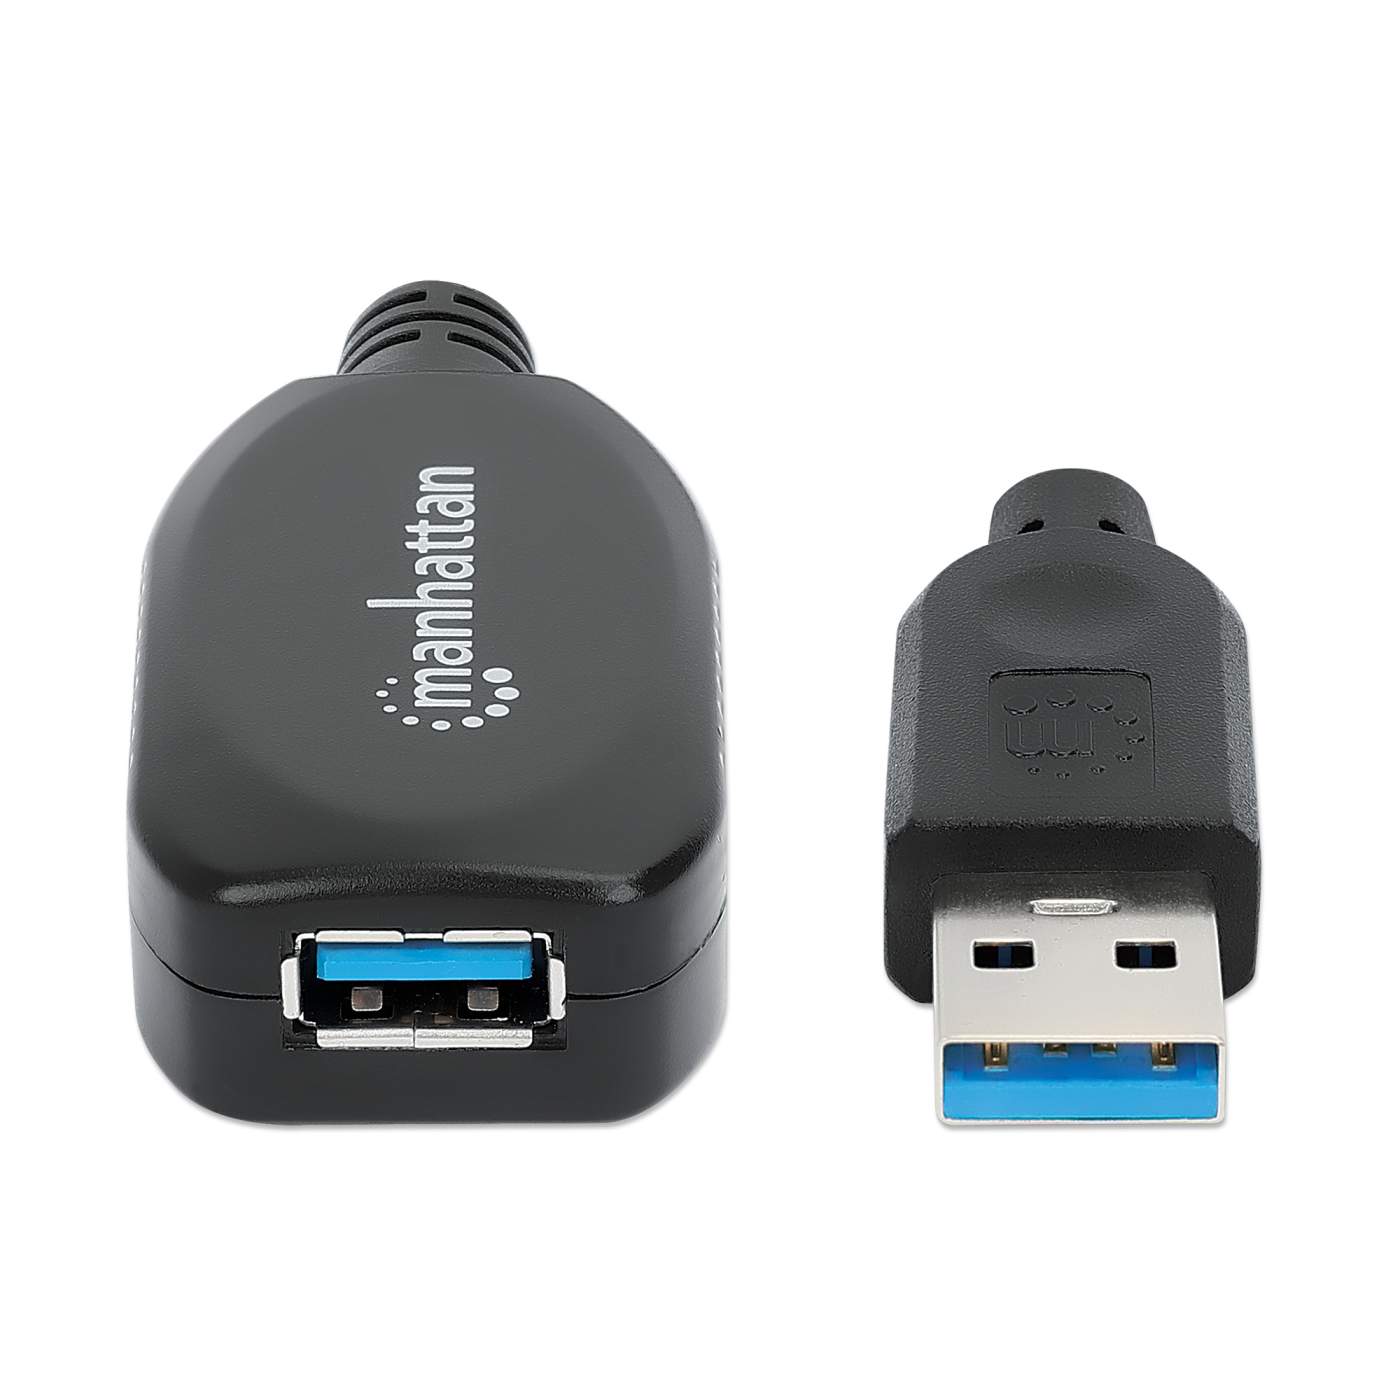 USB 3.0 Type-A Active Extension Cable